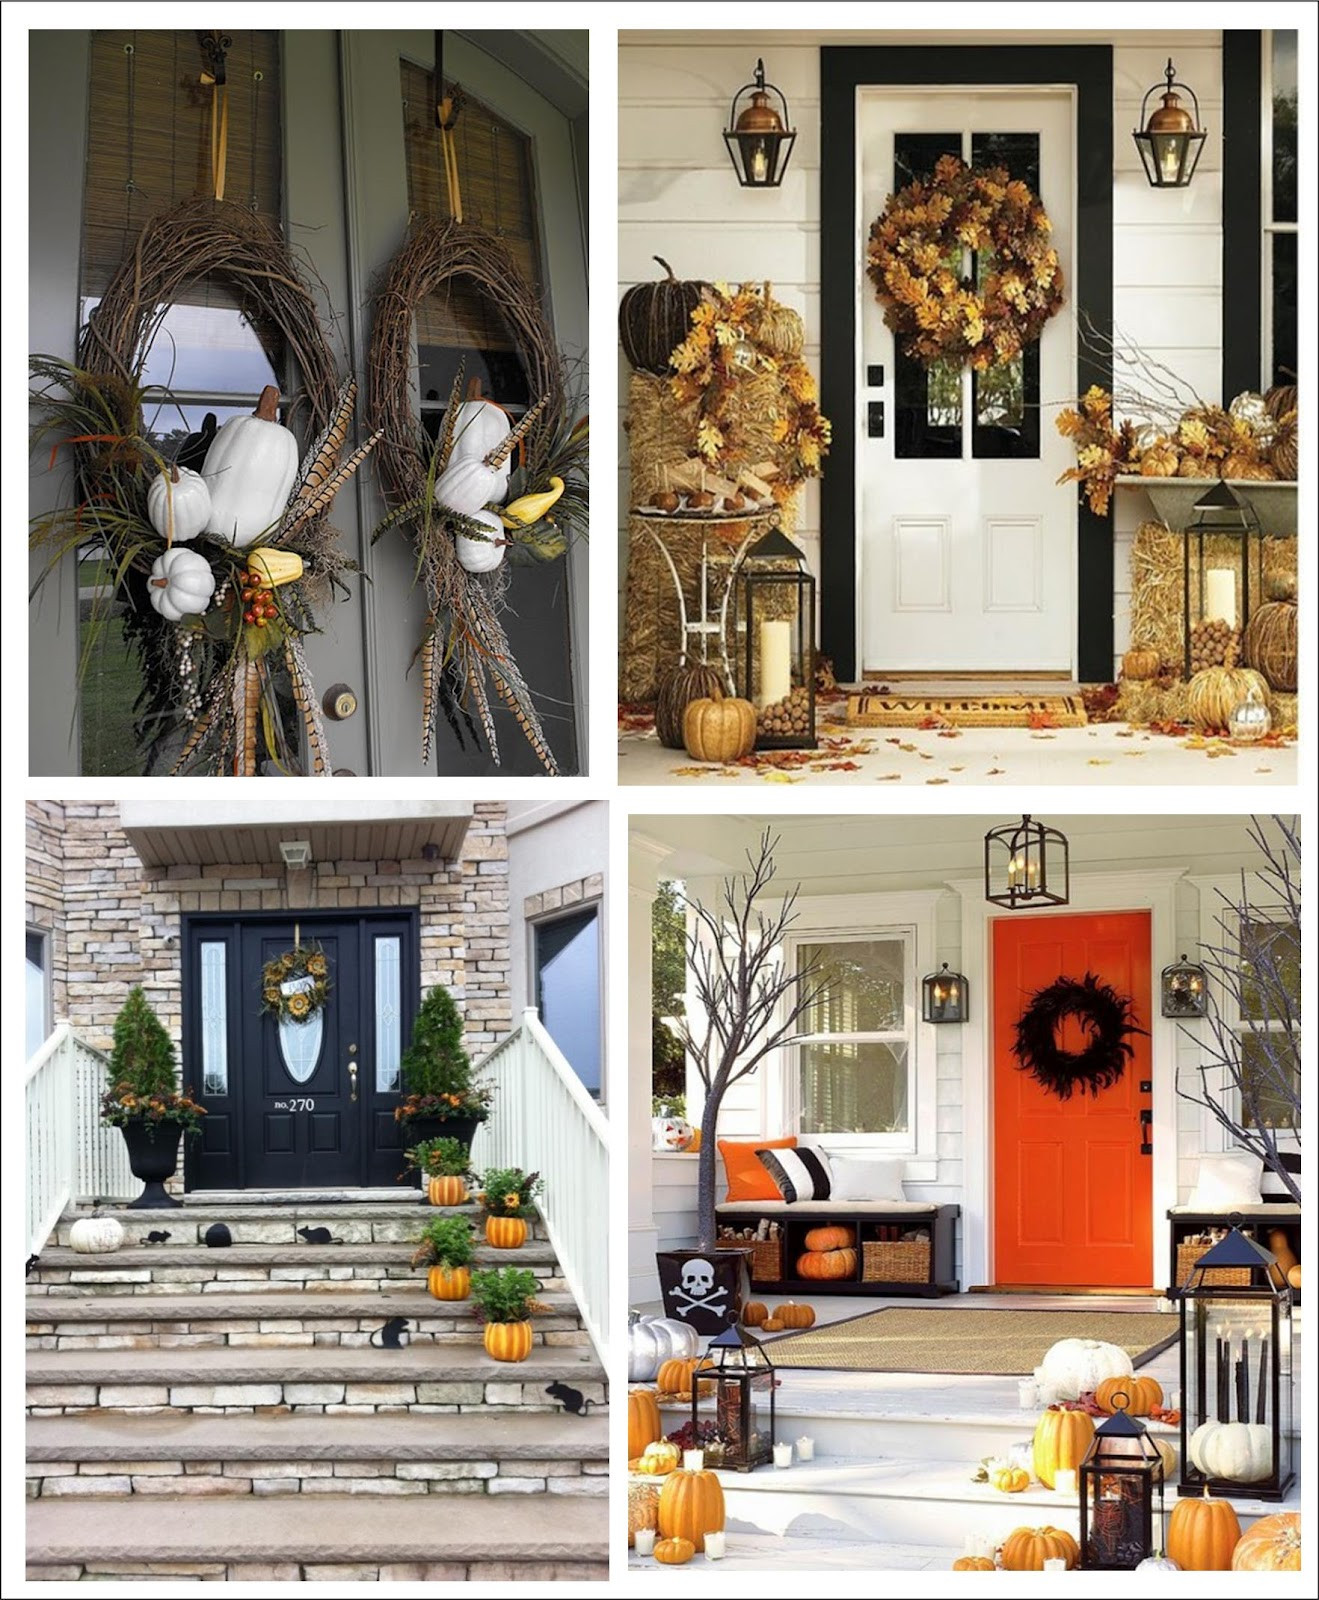 Halloween Porch Ideas
 It s Written on the Wall 90 Fall Porch Decorating Ideas